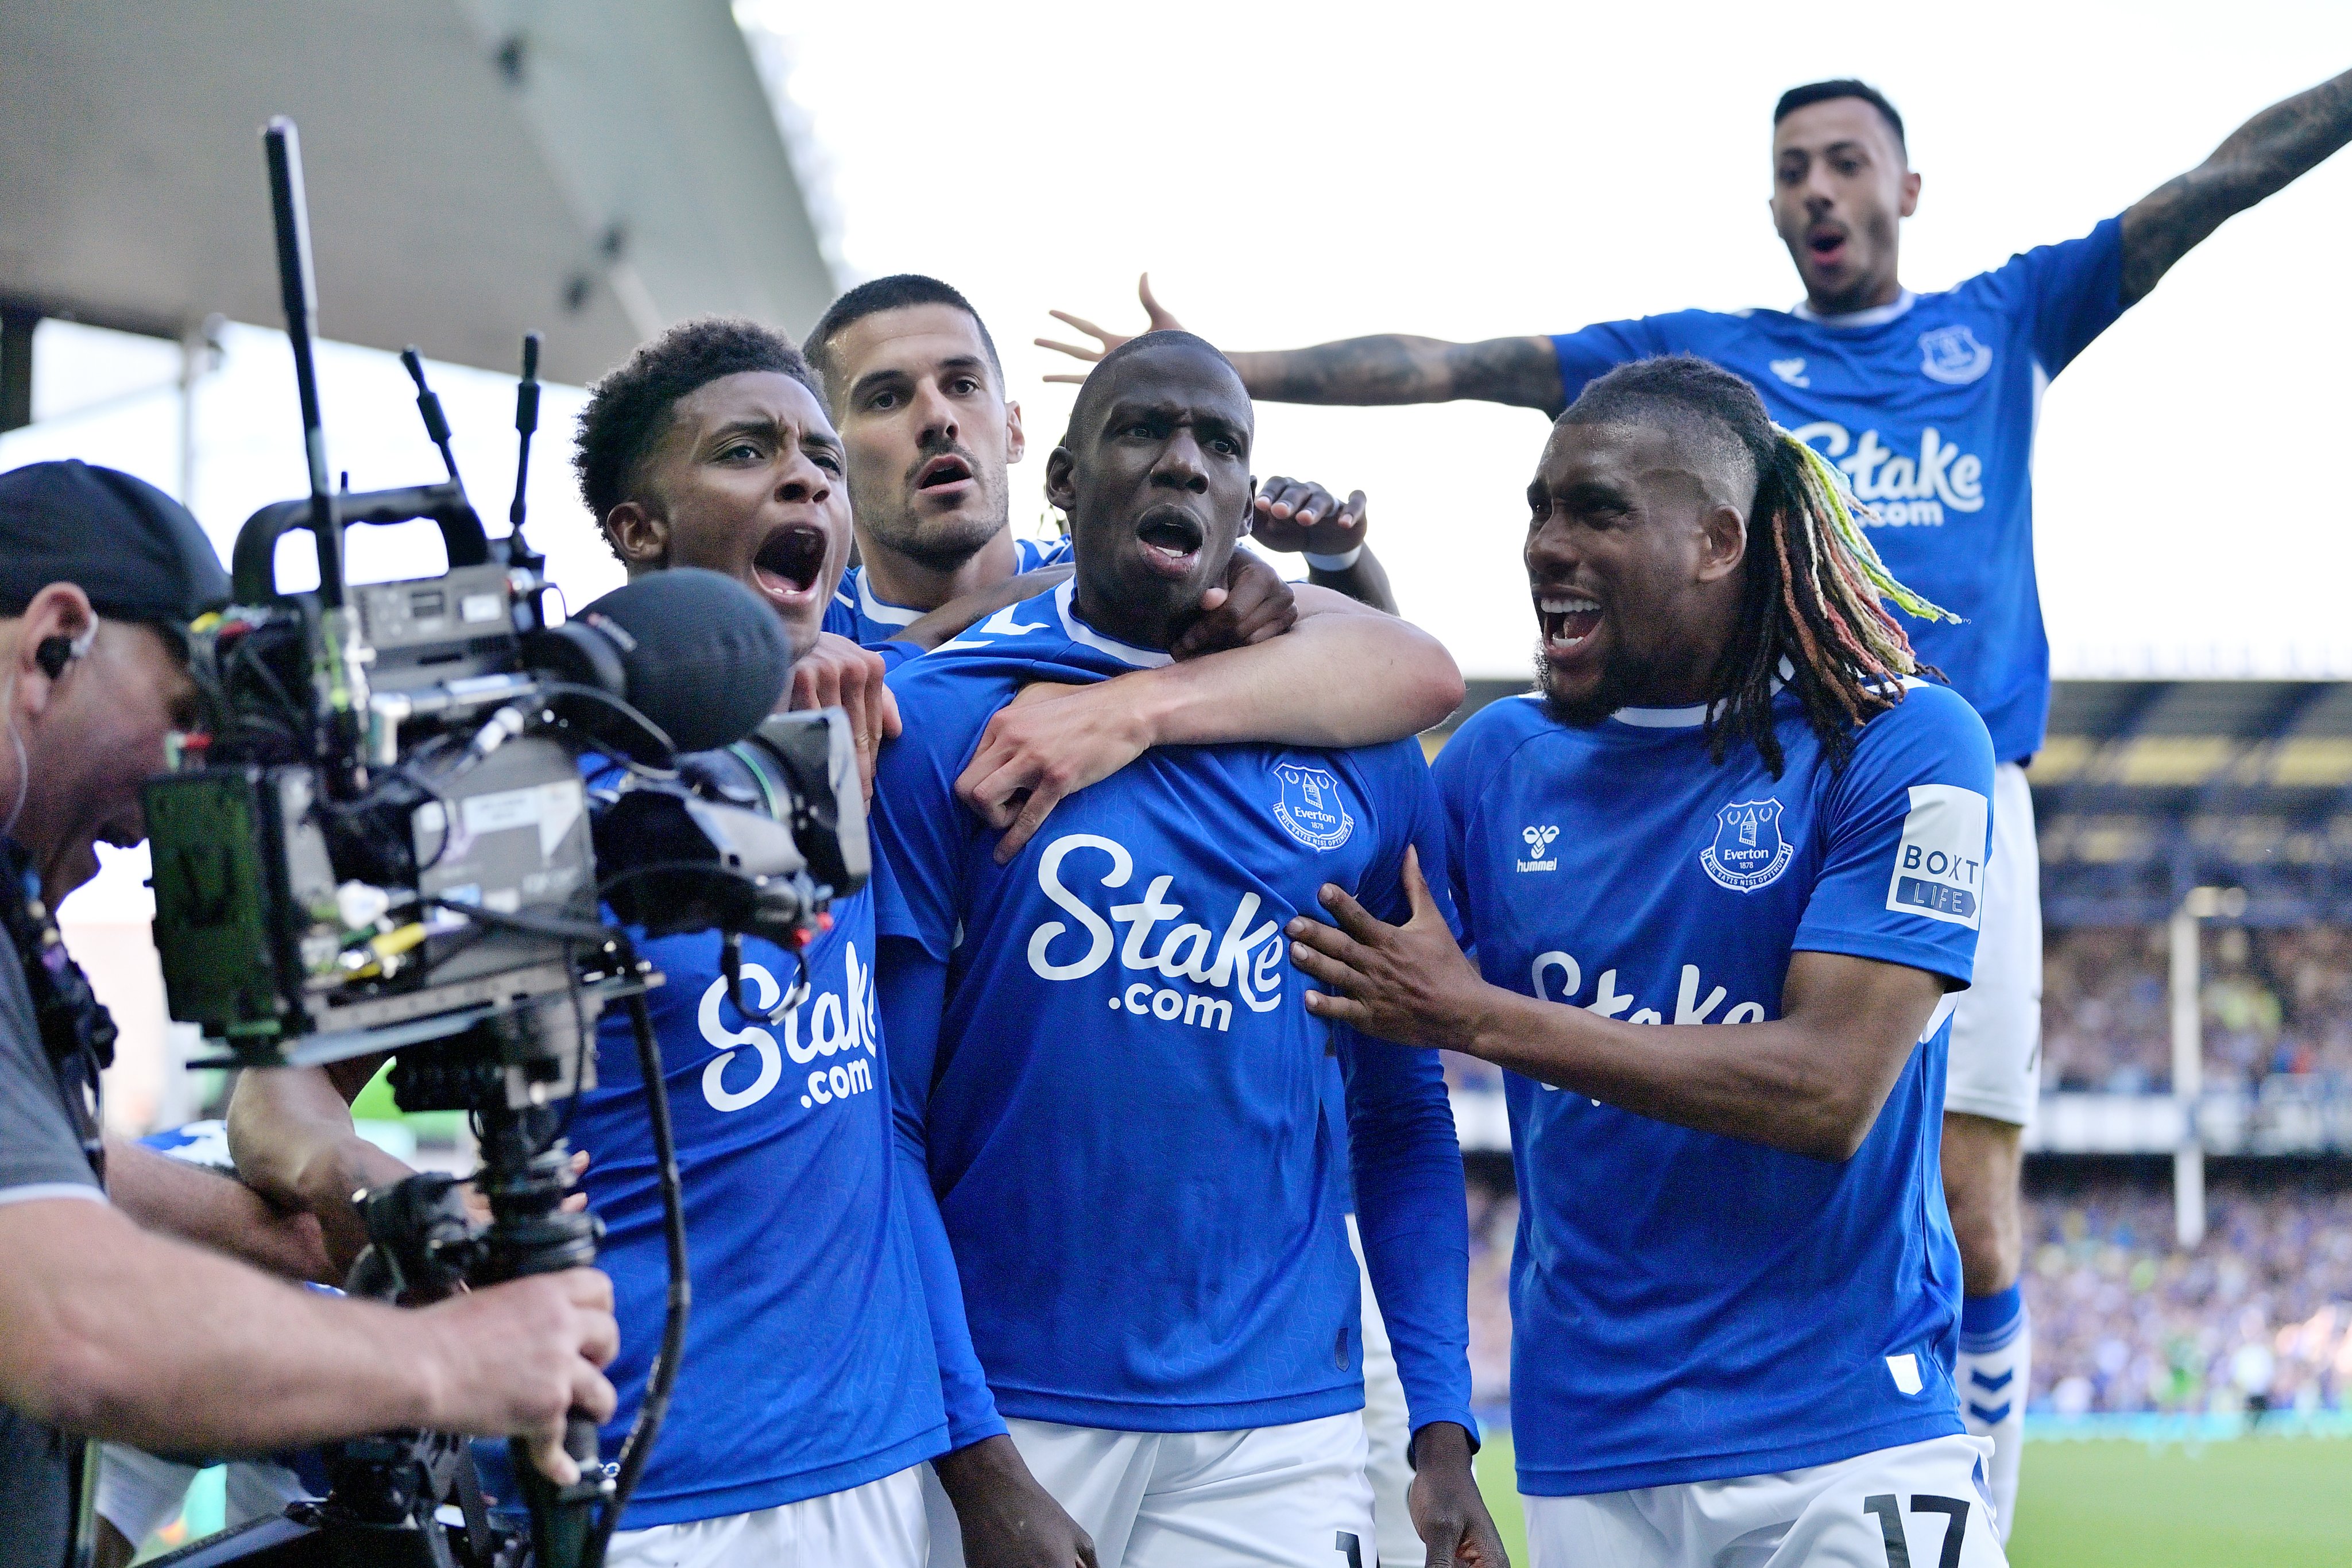 Everton are safe with narrow win as Leicester go down despite victory